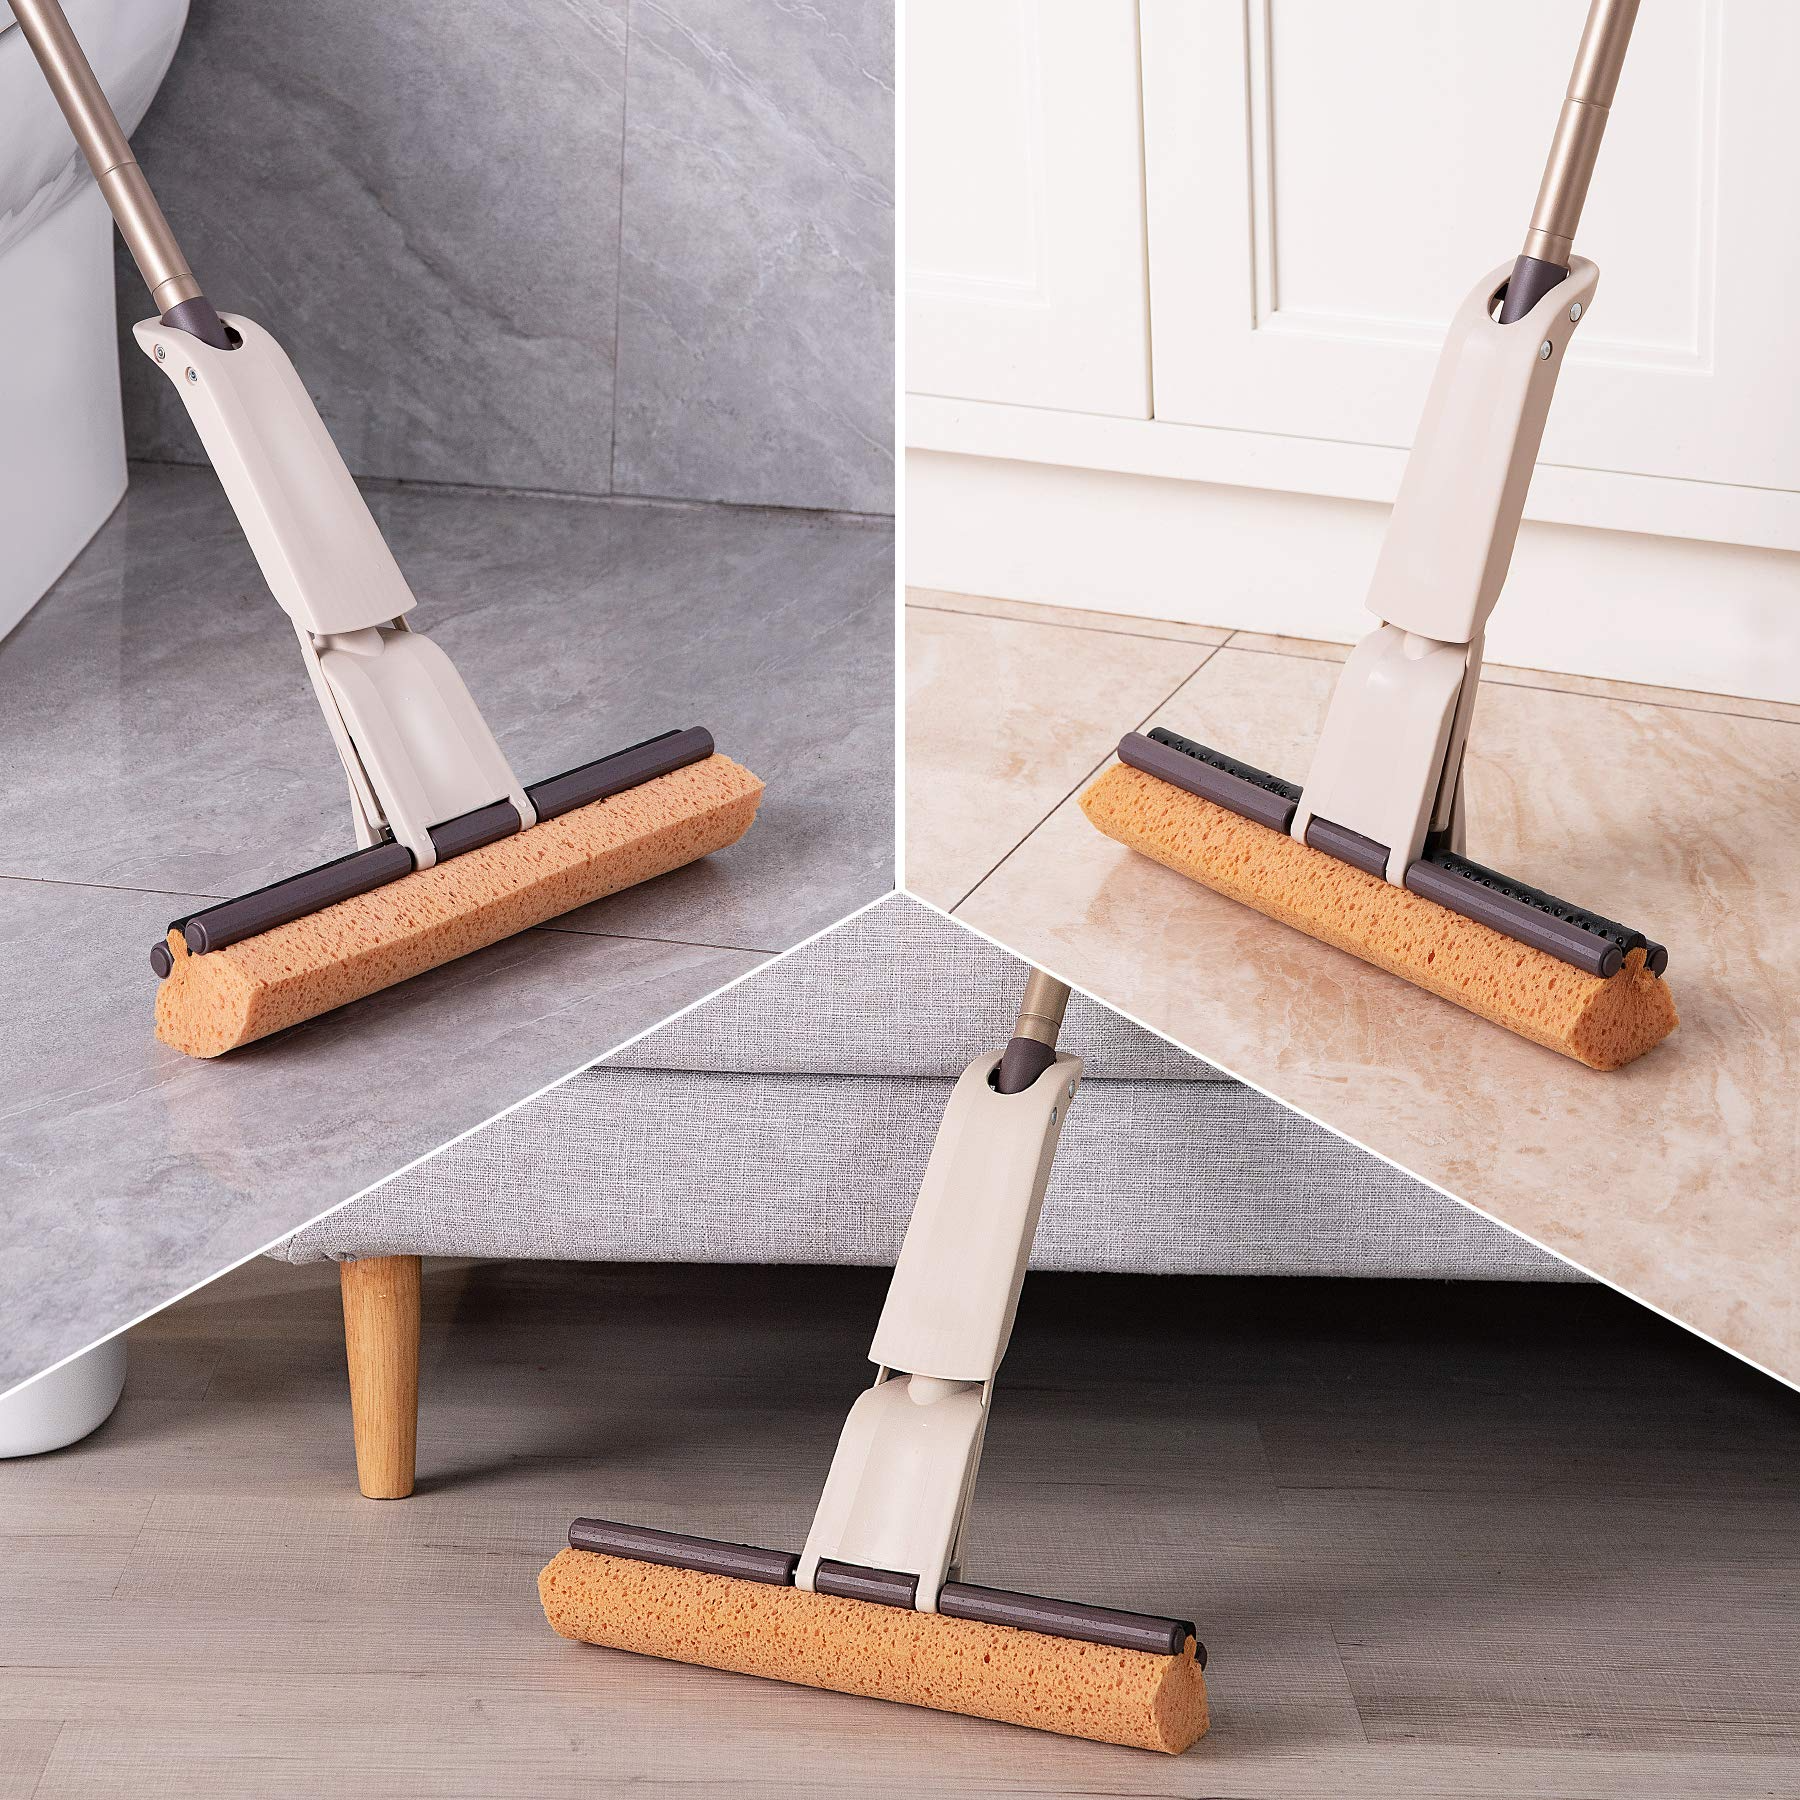 NEW! Hand-Free Flat Squeegee Mop and Bucket Wringing Floor Cleaner Easy  Self Cleaning Dry Wet Dual Use with 2PCS Washable Mop Pads